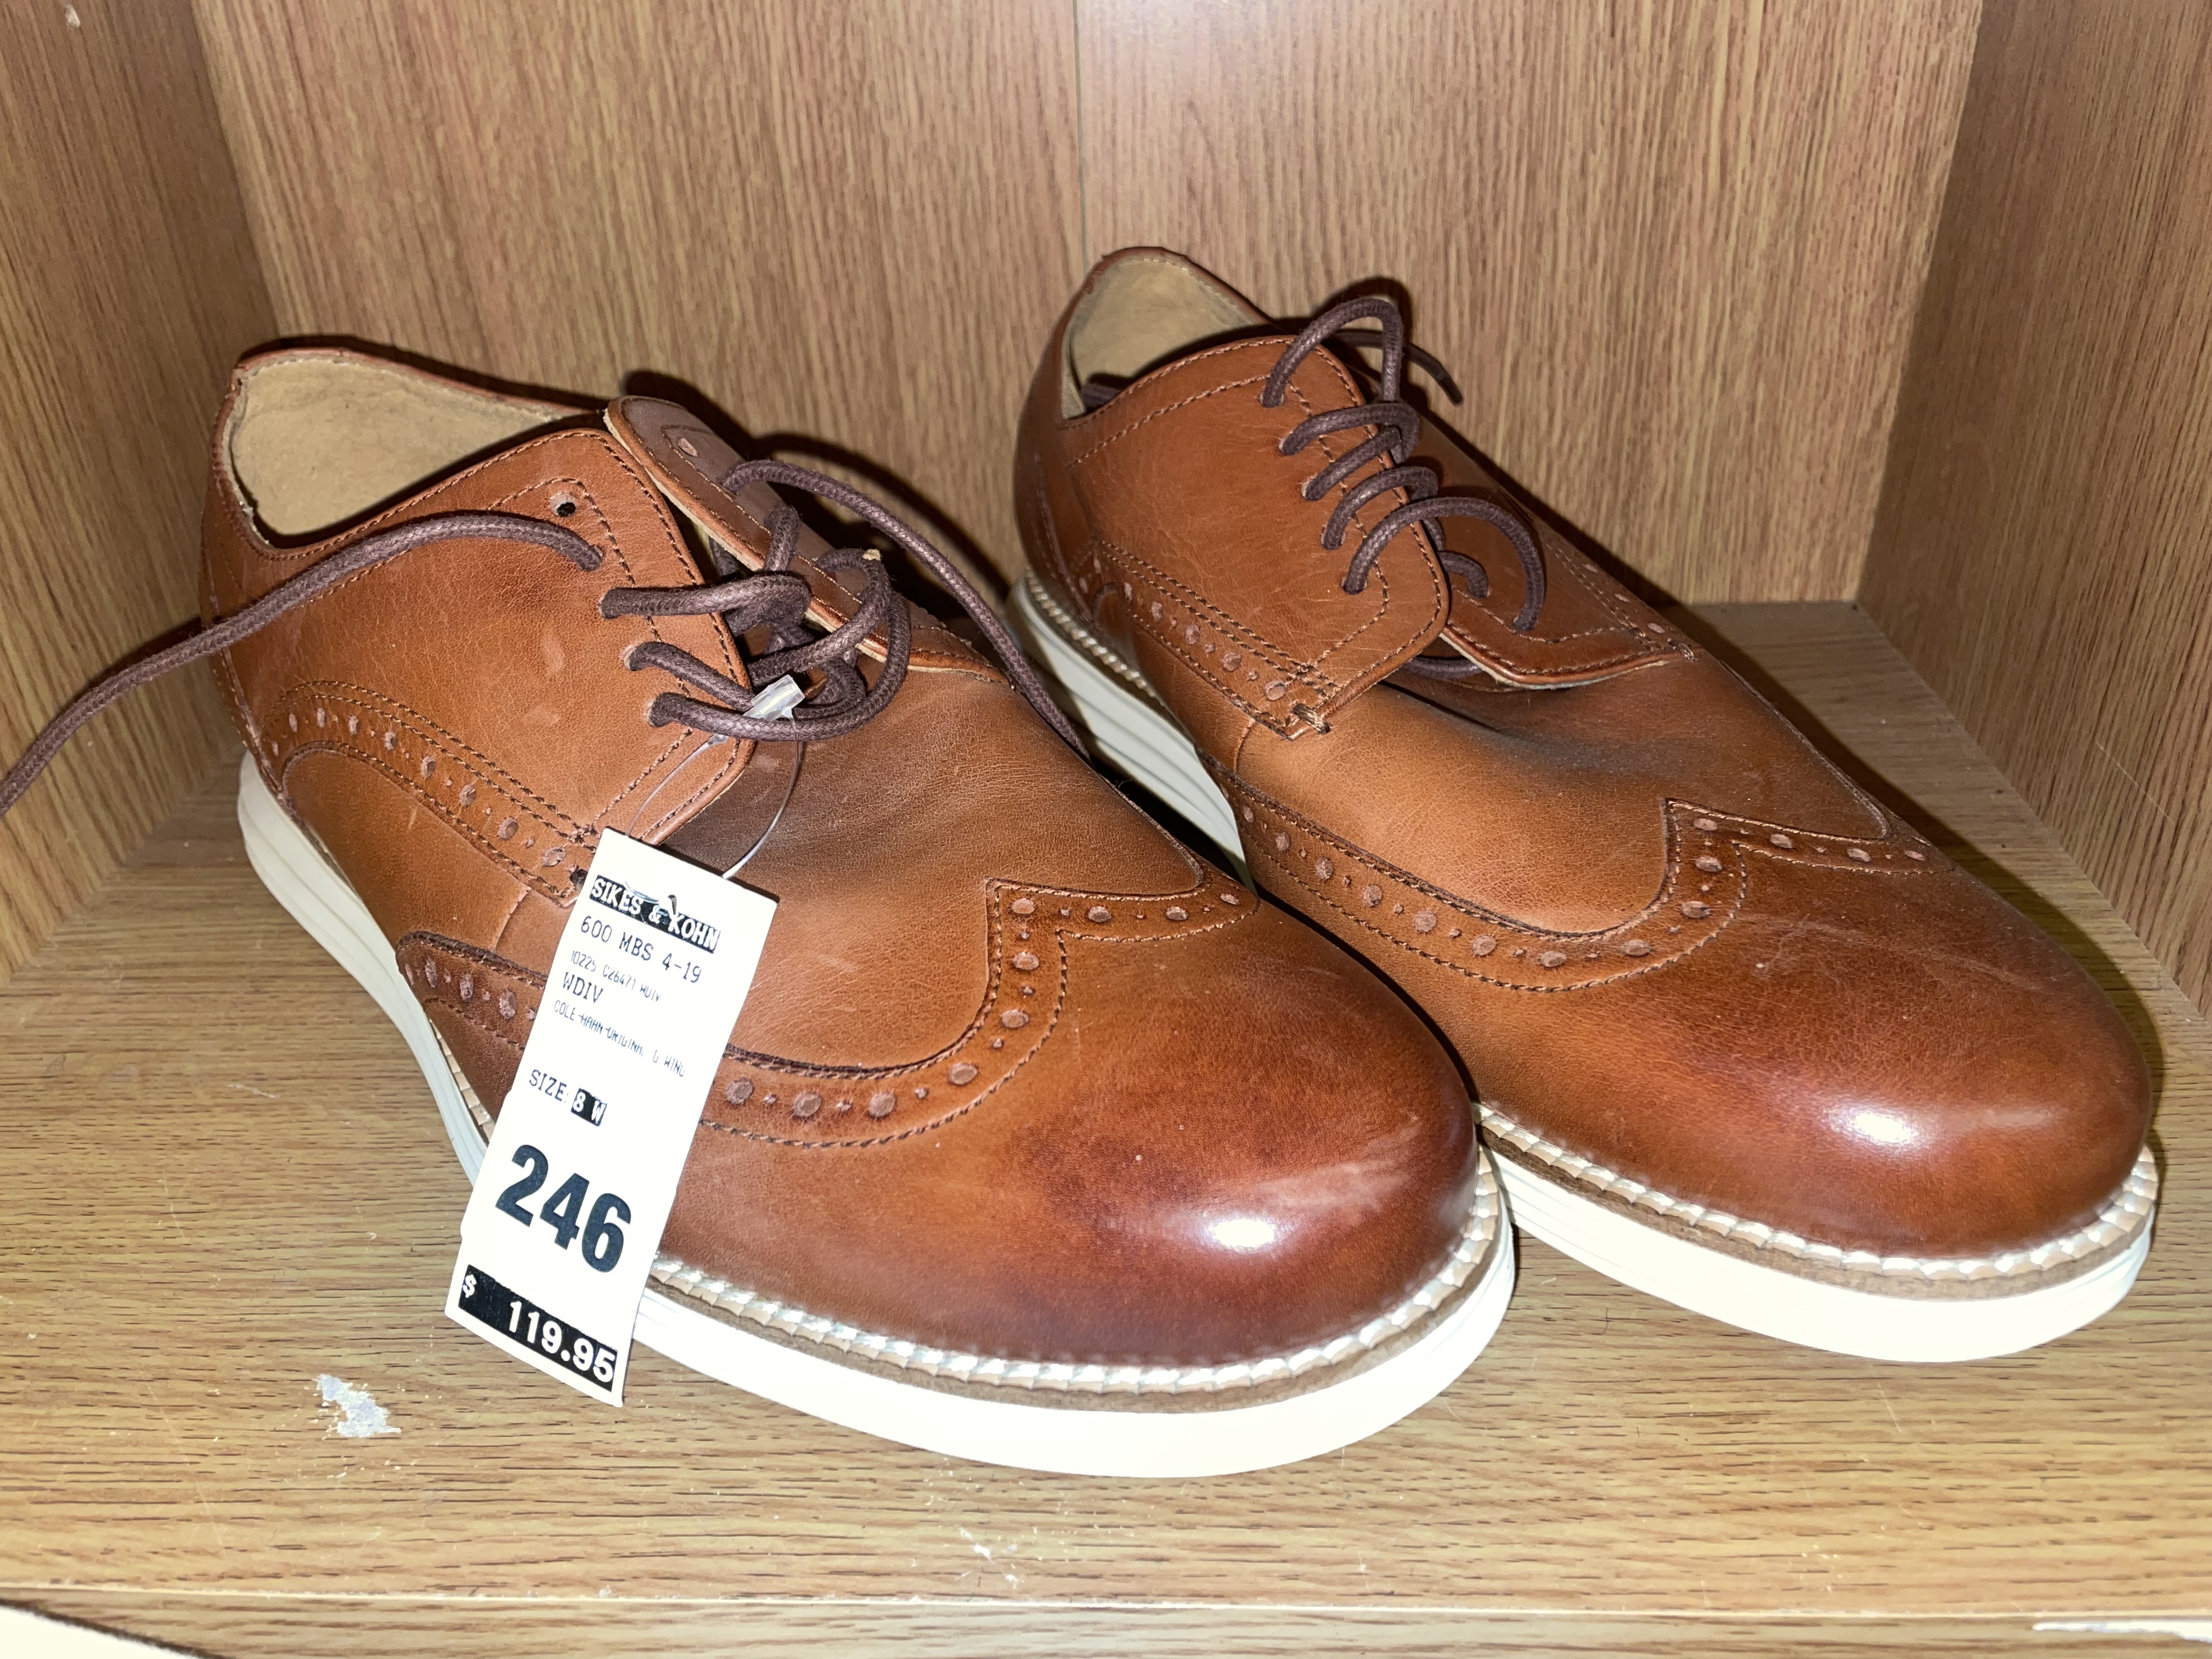 PAIR OF COLEHANN SIZE 8 BROGUES (NEW)